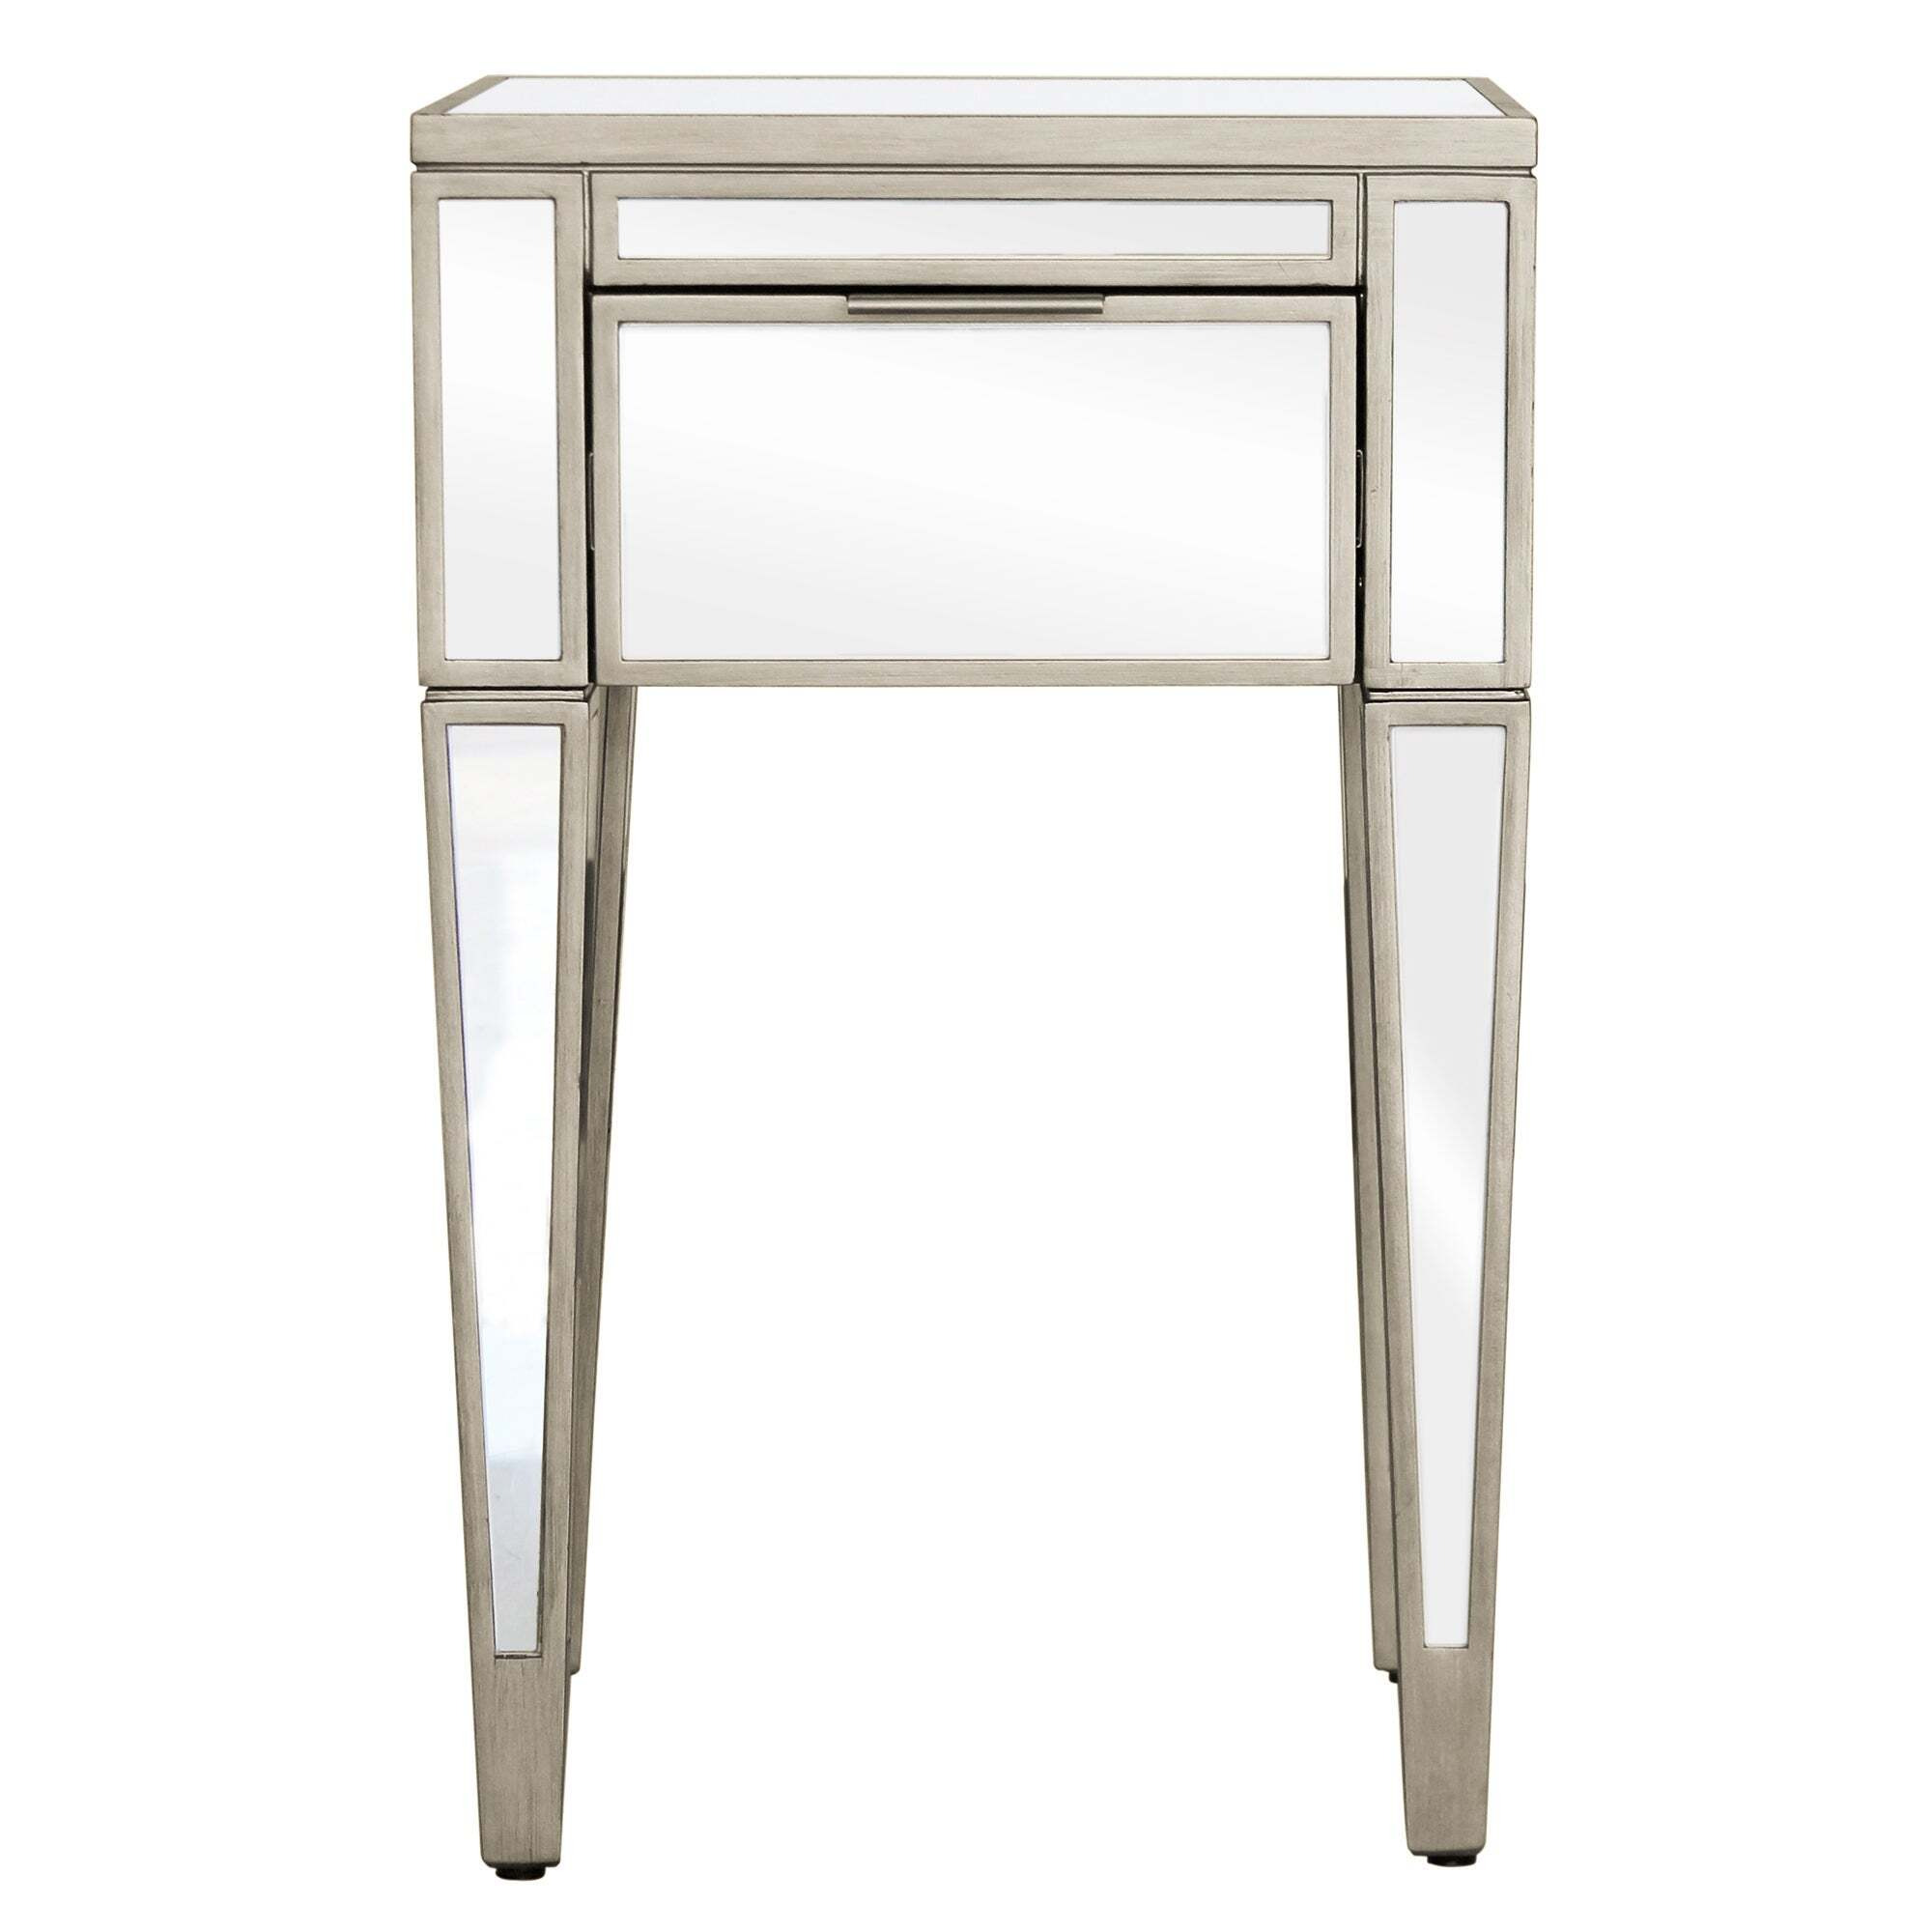 Fitzgerald 1 Drawer Bedside Table, Mirrored Silver